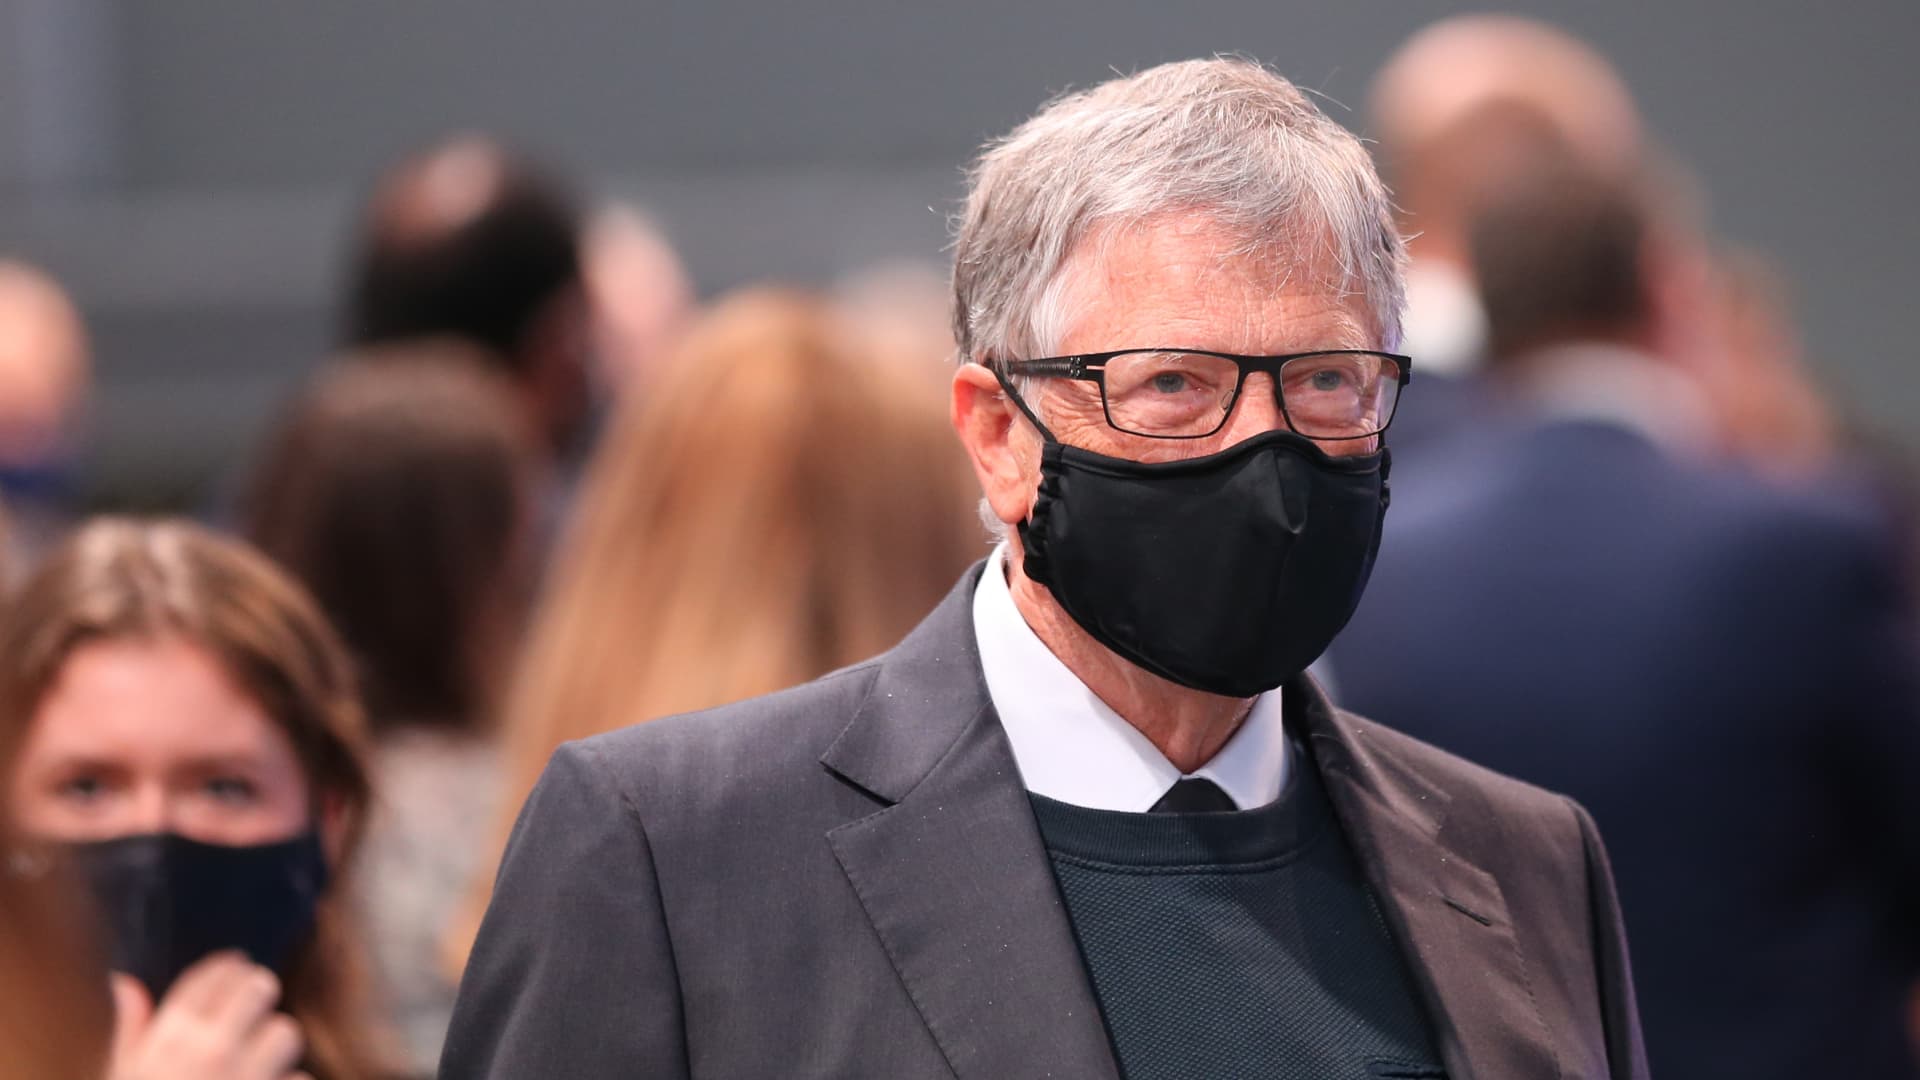 Bill Gates, co-founder of Microsoft and co-chair of the Bill and Melinda Gates Foundation, during the COP26 climate talks in Glasgow, U.K., on Nov. 2, 2021.